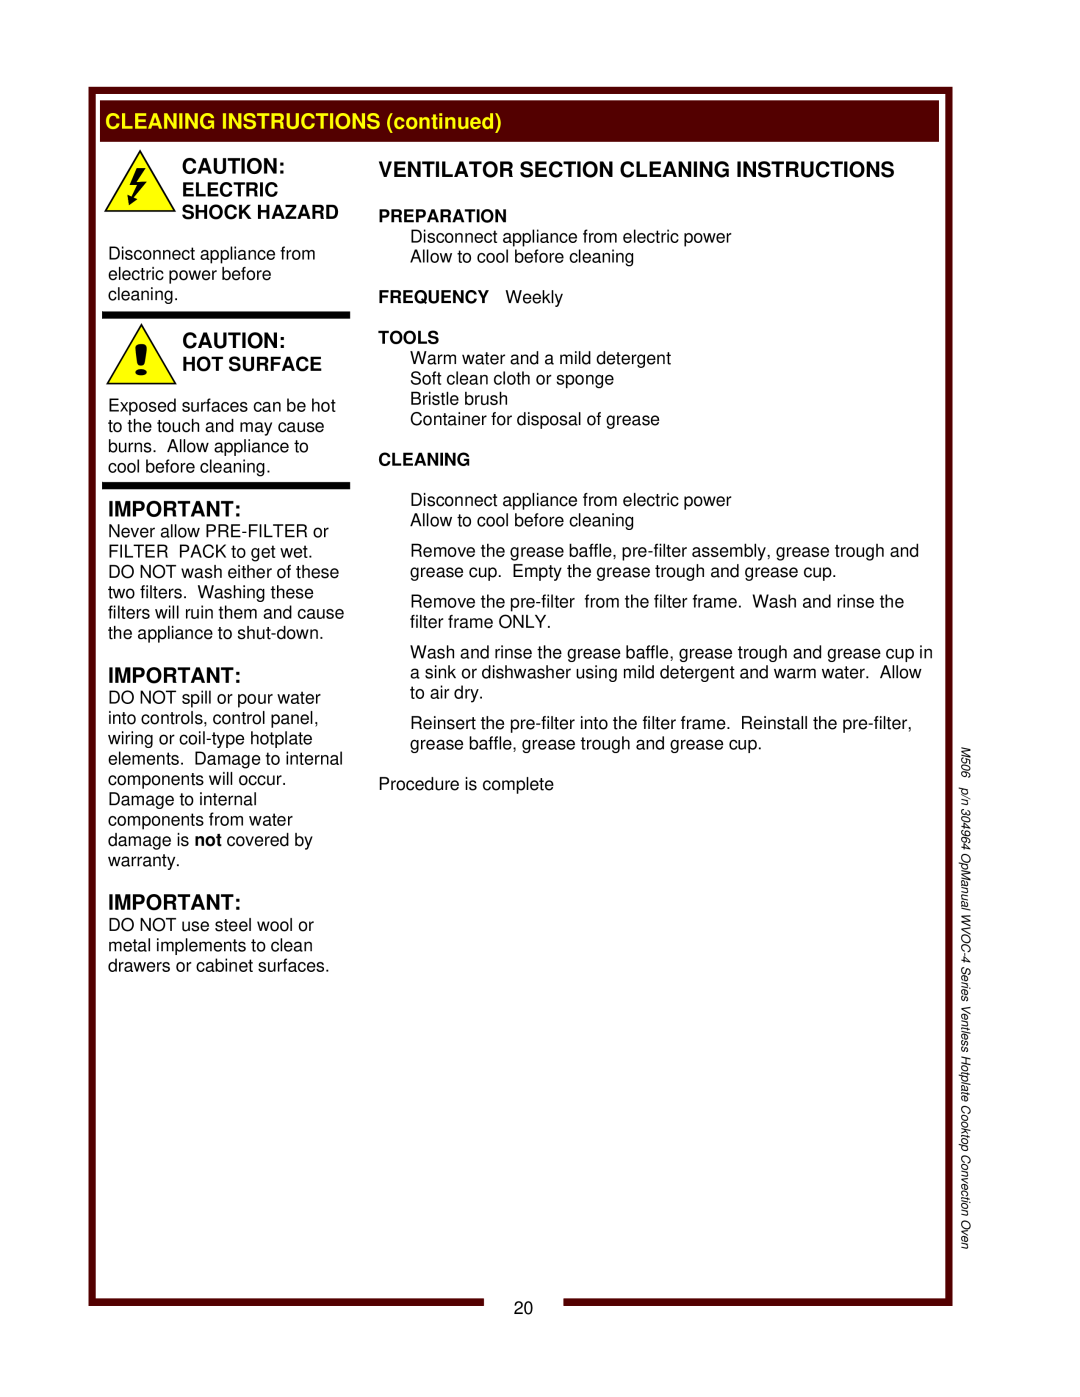 Wells WVOC-4HS CLEANING INSTRUCTIONS continued, Ventilator Section Cleaning Instructions, Electric Shock Hazard 